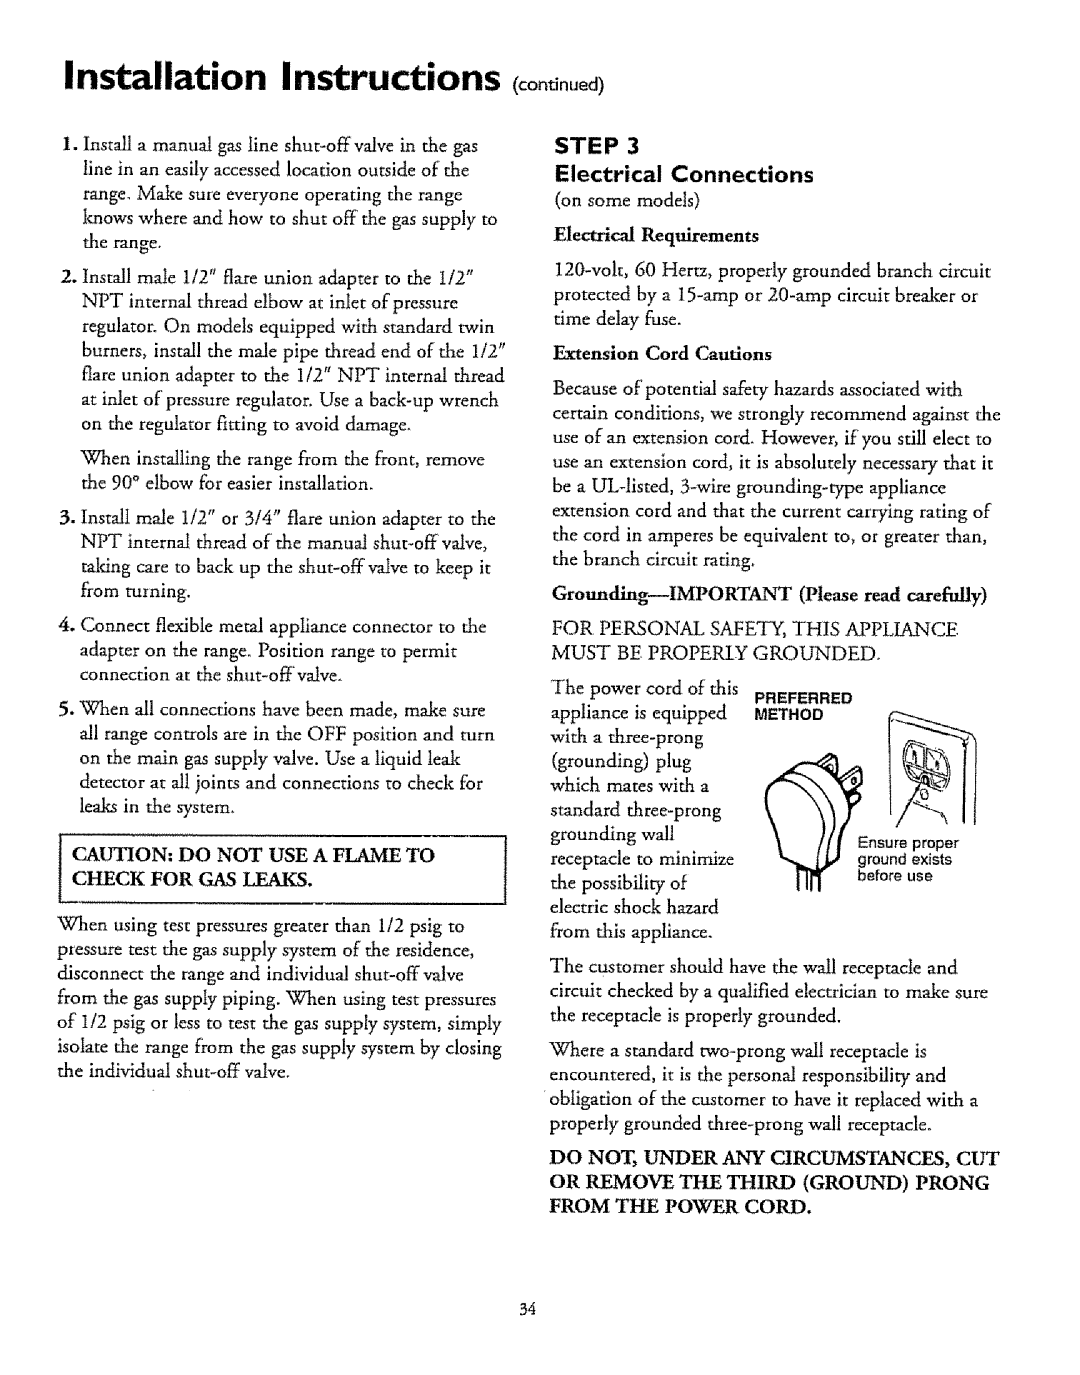 Sears 71161 Installation Instructions, coo 0ood, STEP Electrical Connections, Electrical Requirements, grounding wall 